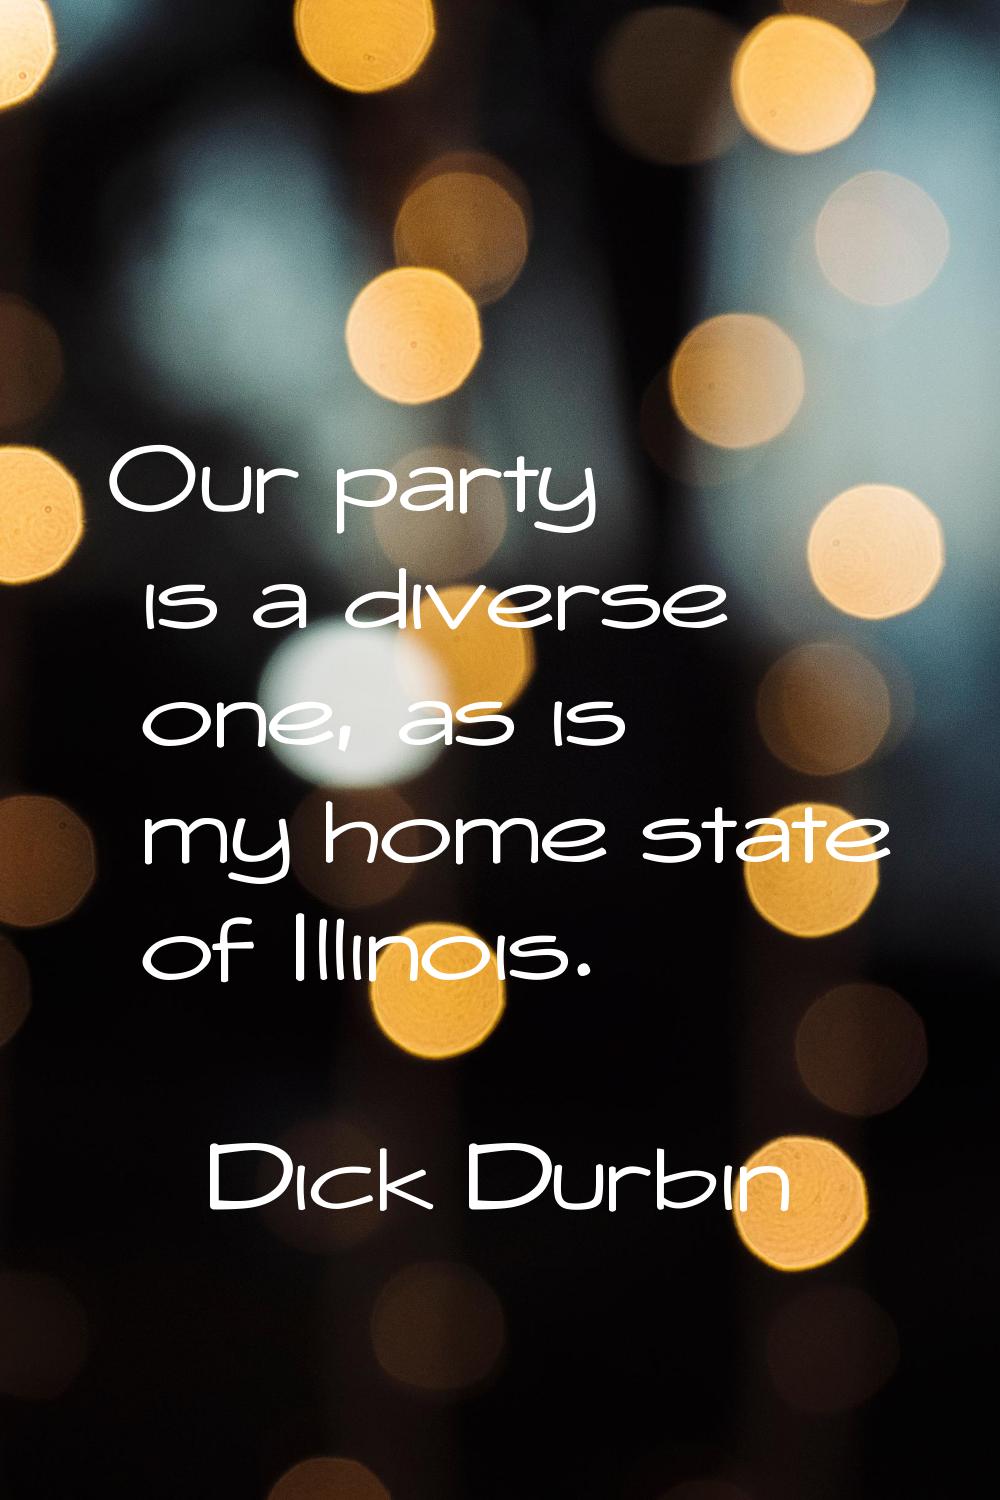 Our party is a diverse one, as is my home state of Illinois.